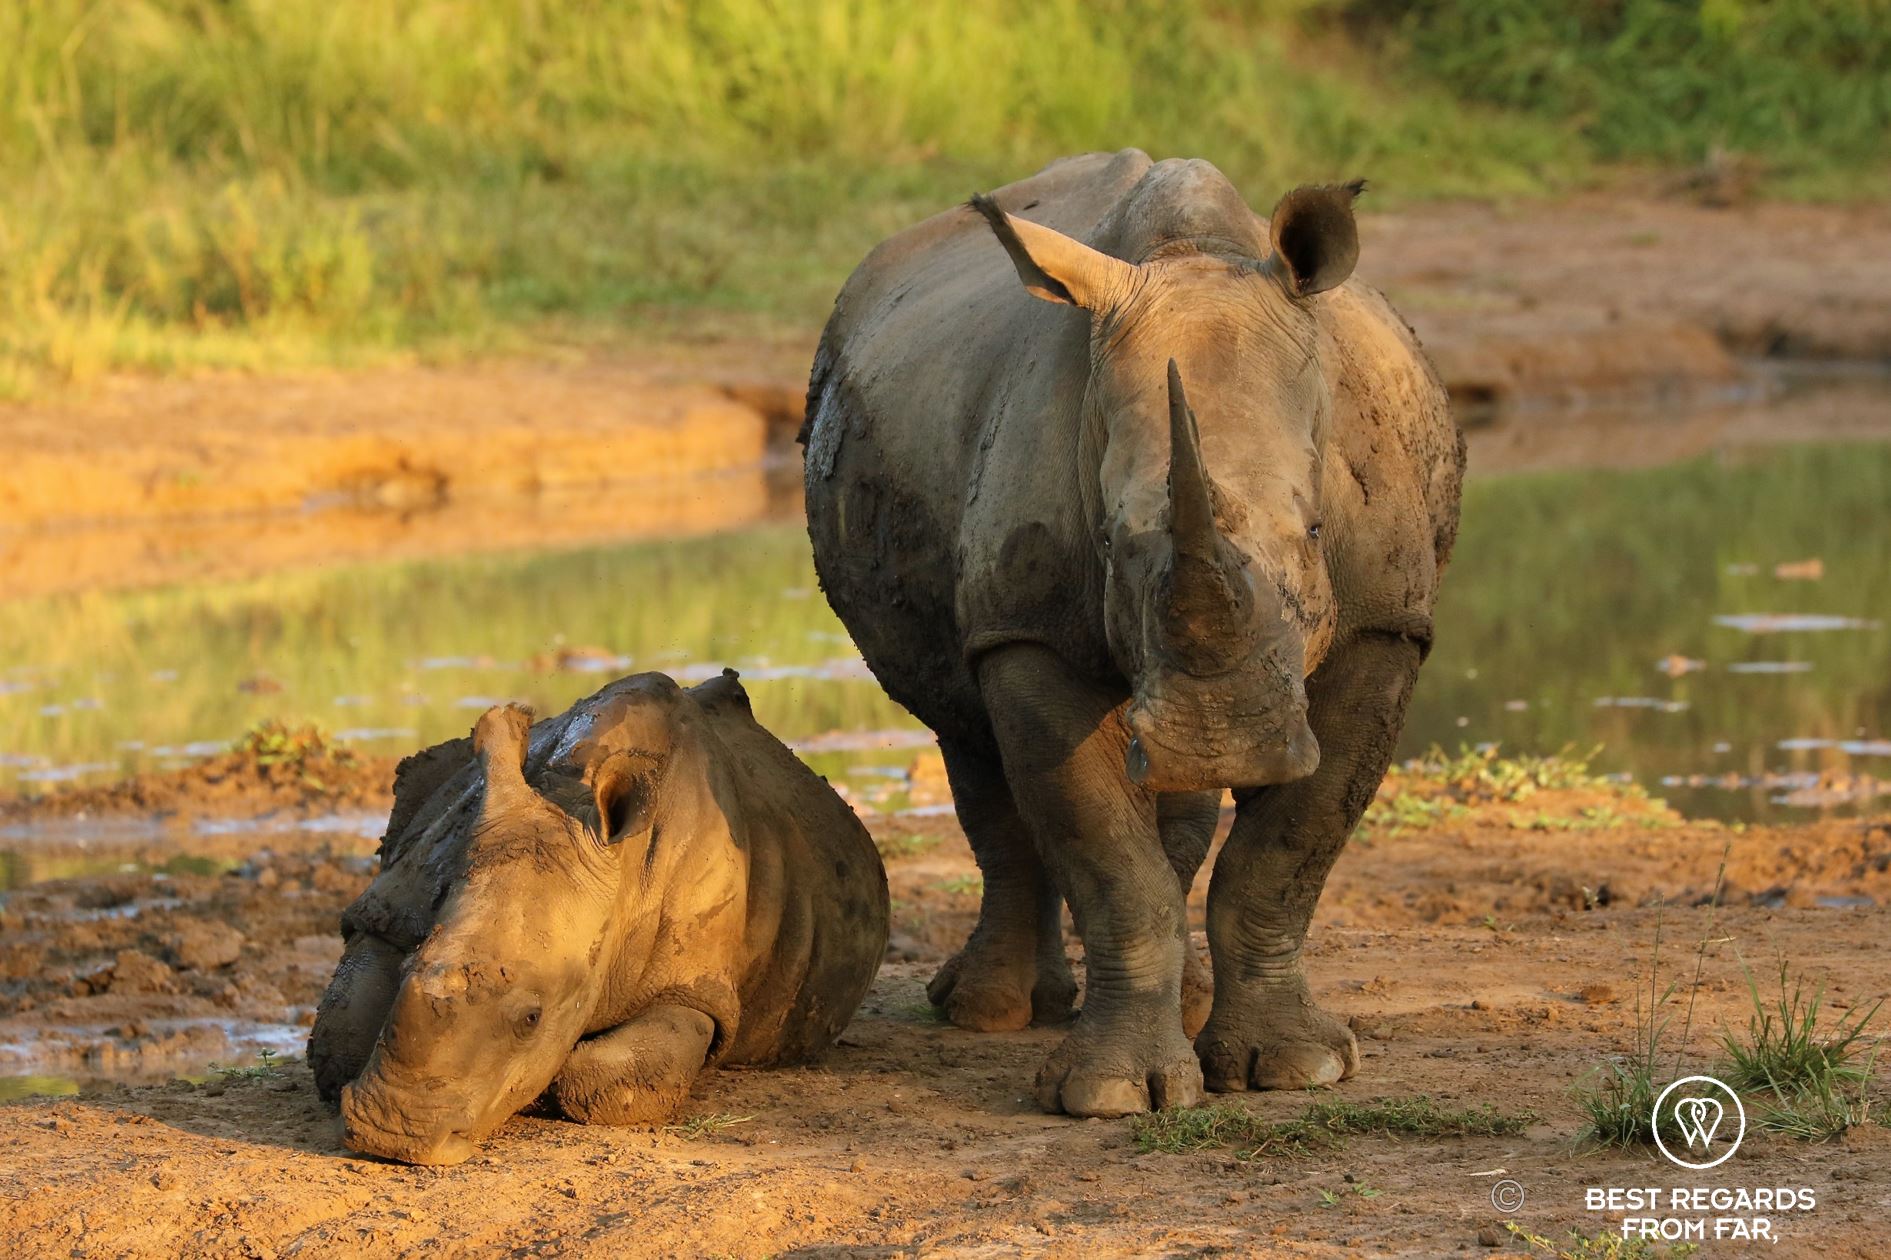 Mother rhino with her calf by a waterhole at sunrise, South Africa